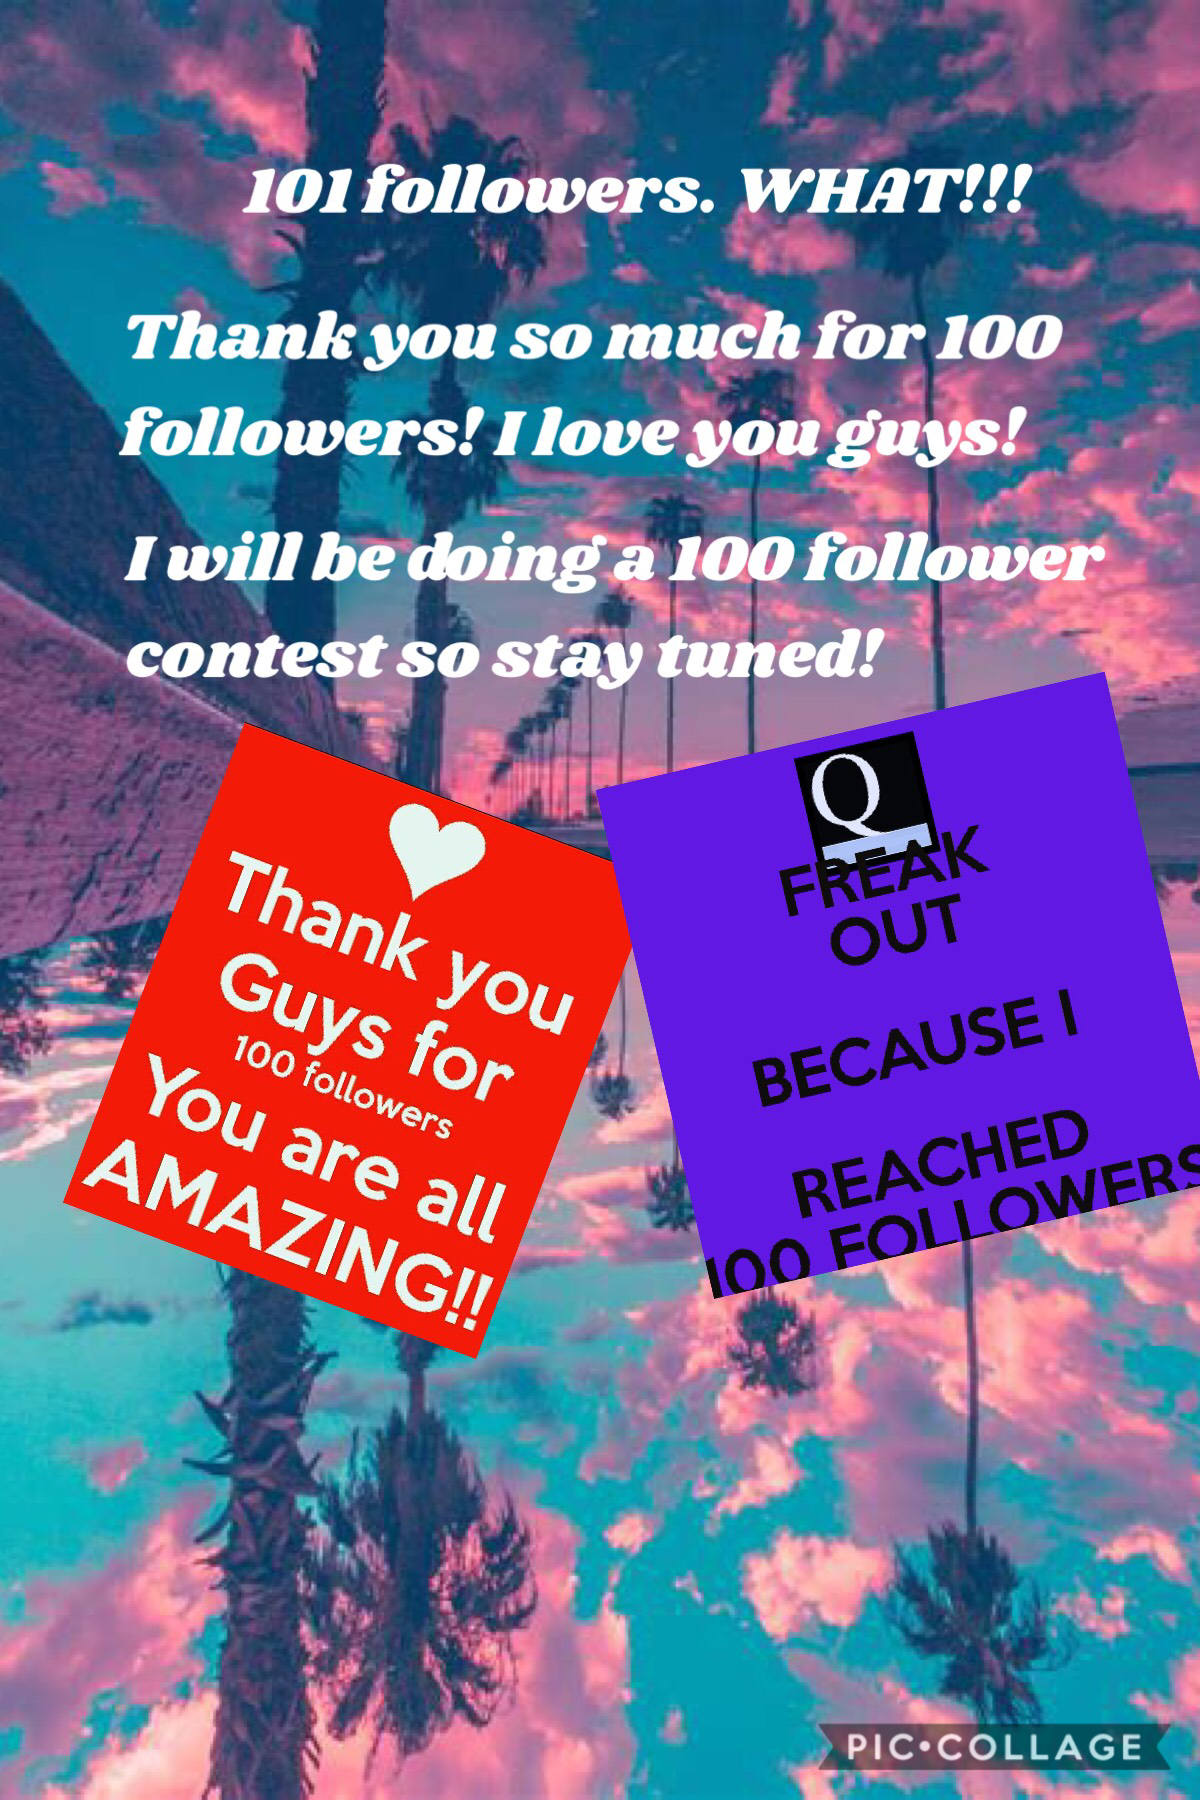 Thank you sooo much for 100+ followers! I will be doing a contest soon!